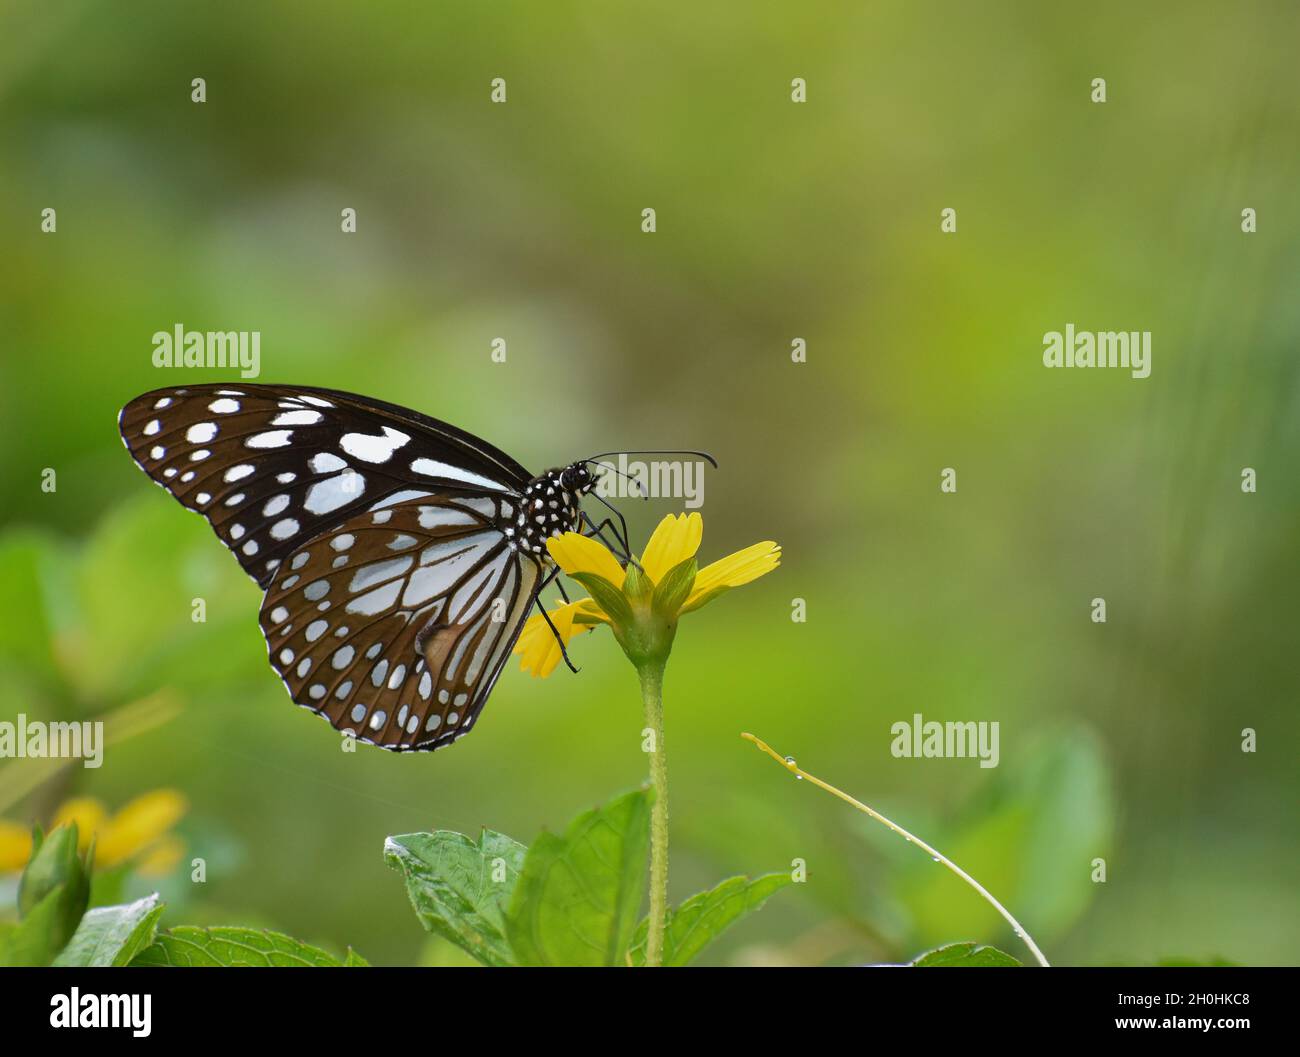 Blue tiger butterfly on yellow flower, green background Stock Photo